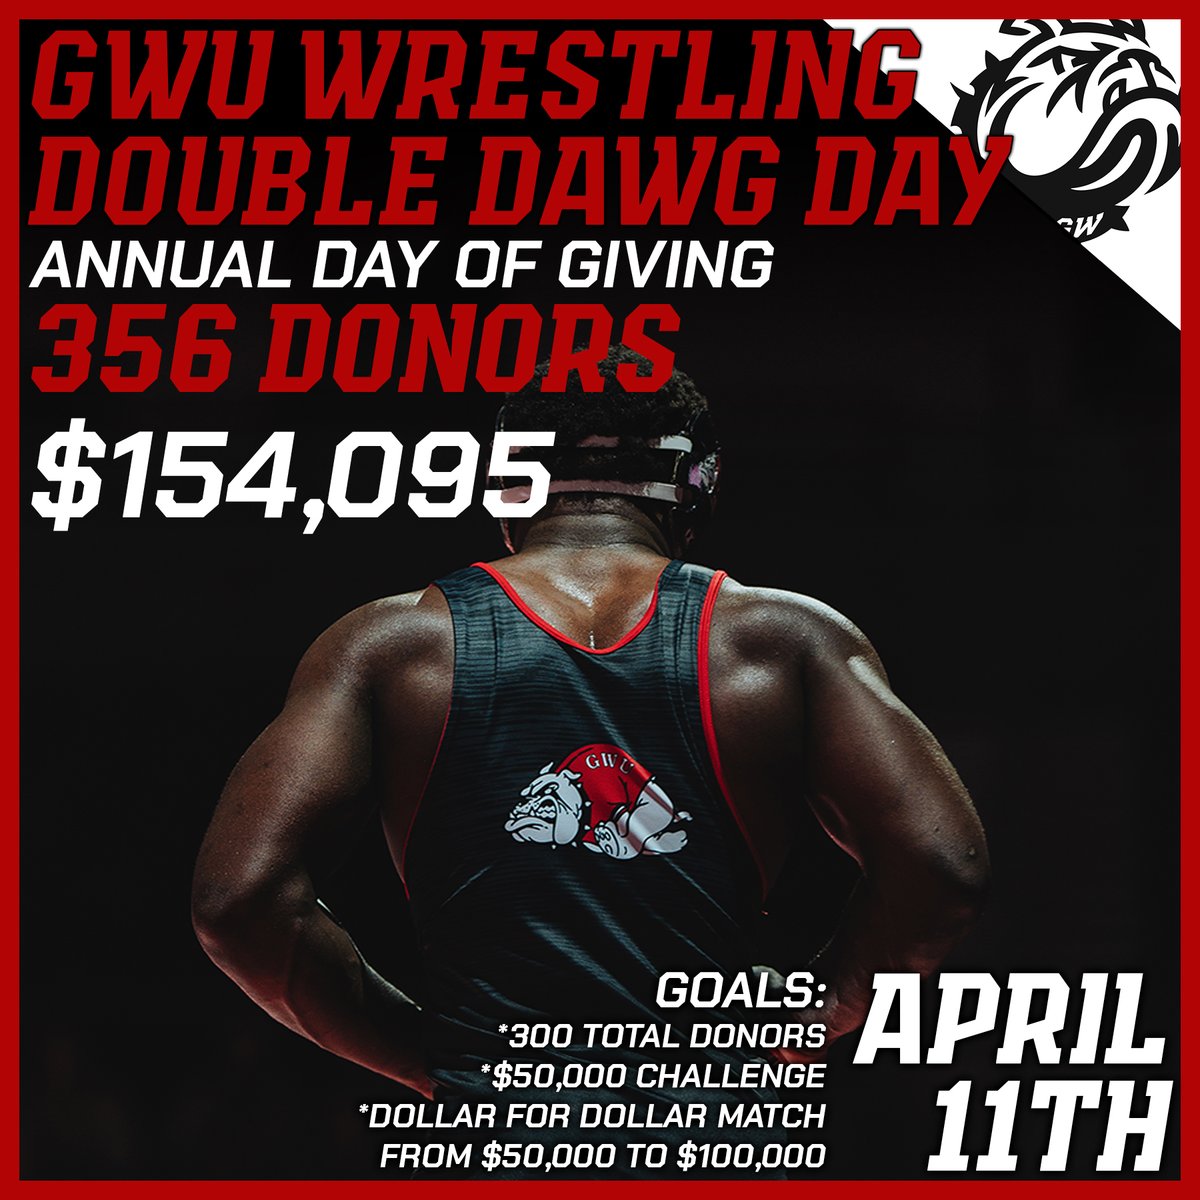 And with that, the 2024 #DoubleDawgDay comes to end. Our team was able to raise $154,095 for the day, through 356 generous donors. We CANNOT expressive our gratitude enough to say thanks for your generosity. This has been an amazing day and will make a huge impact on our program.